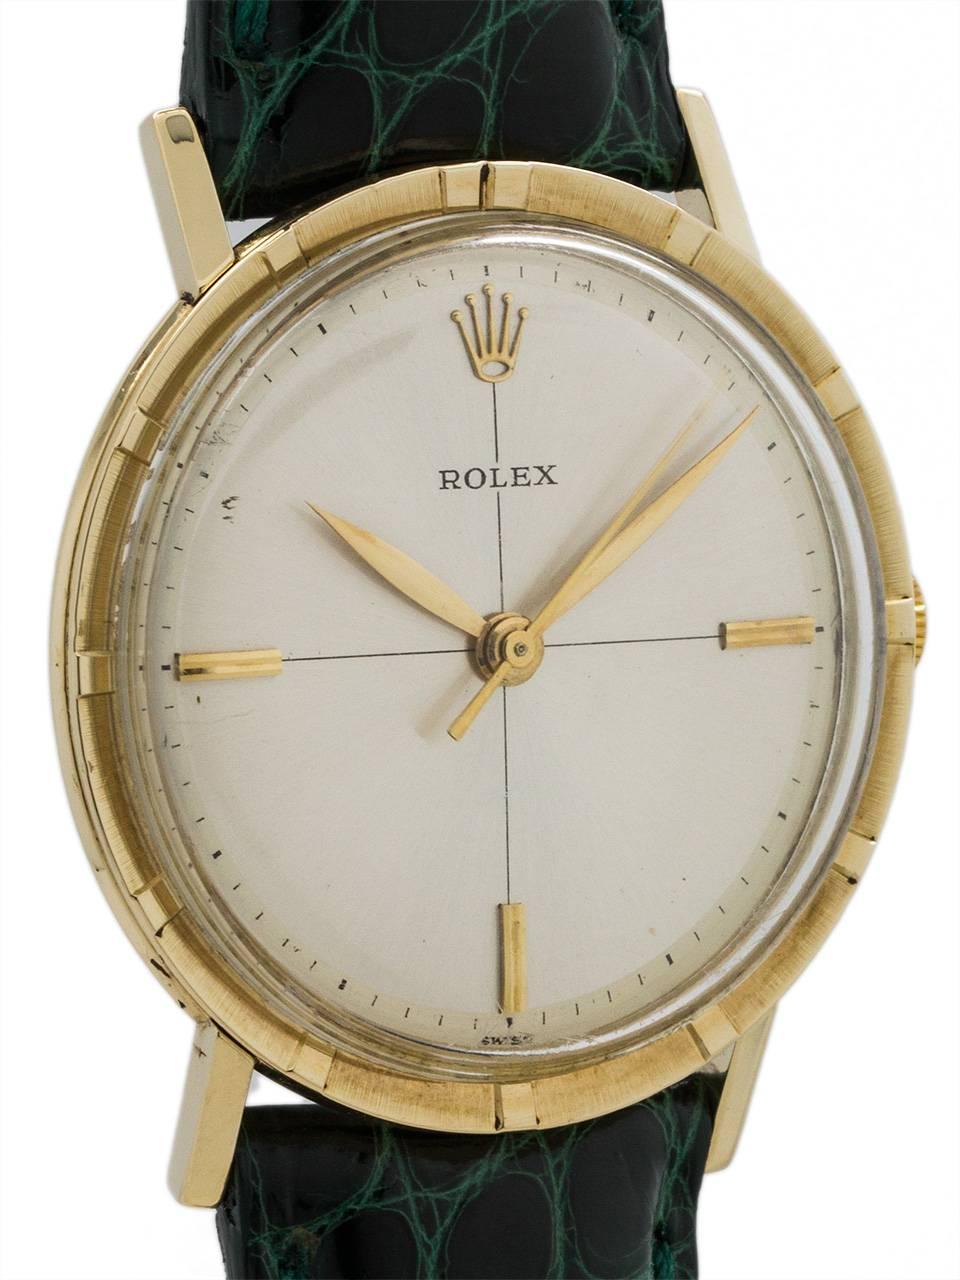 Vintage Rolex 14K gold manual wind dress model circa 1960’s. Featuring a modernist design 34 X 39mm case with wide engine turned bezel, acrylic dome crystal, and beautiful original minimalist silver satin dial with applied gold indexes and tapered